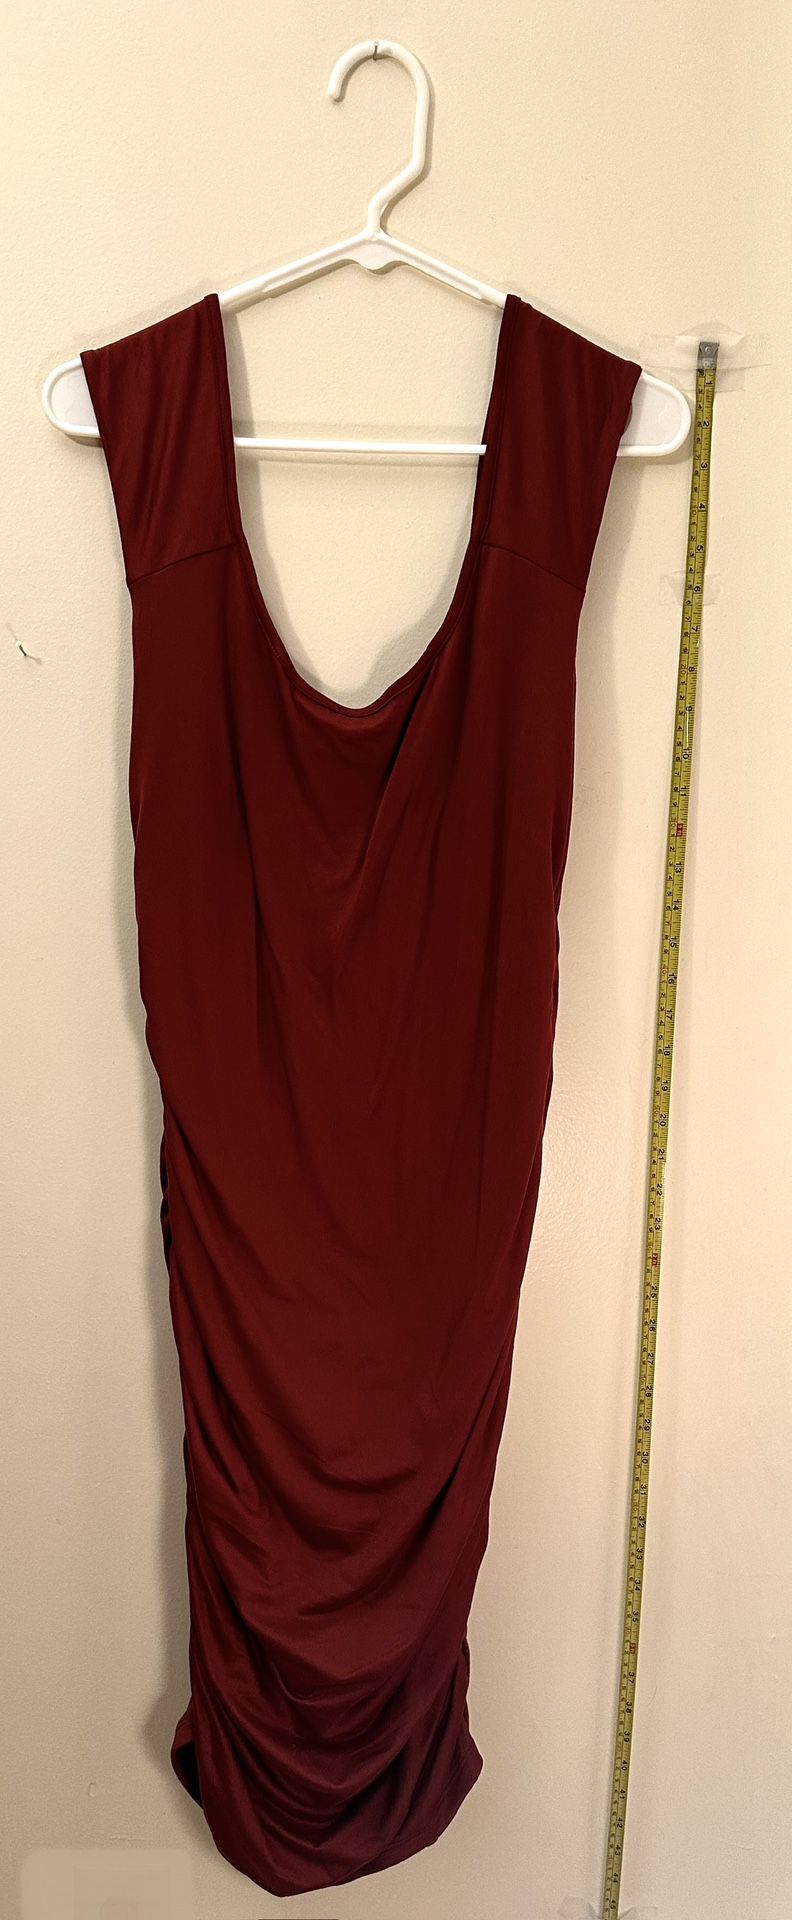 Dark Red Midi Dress - New With Tags - Size XLarge